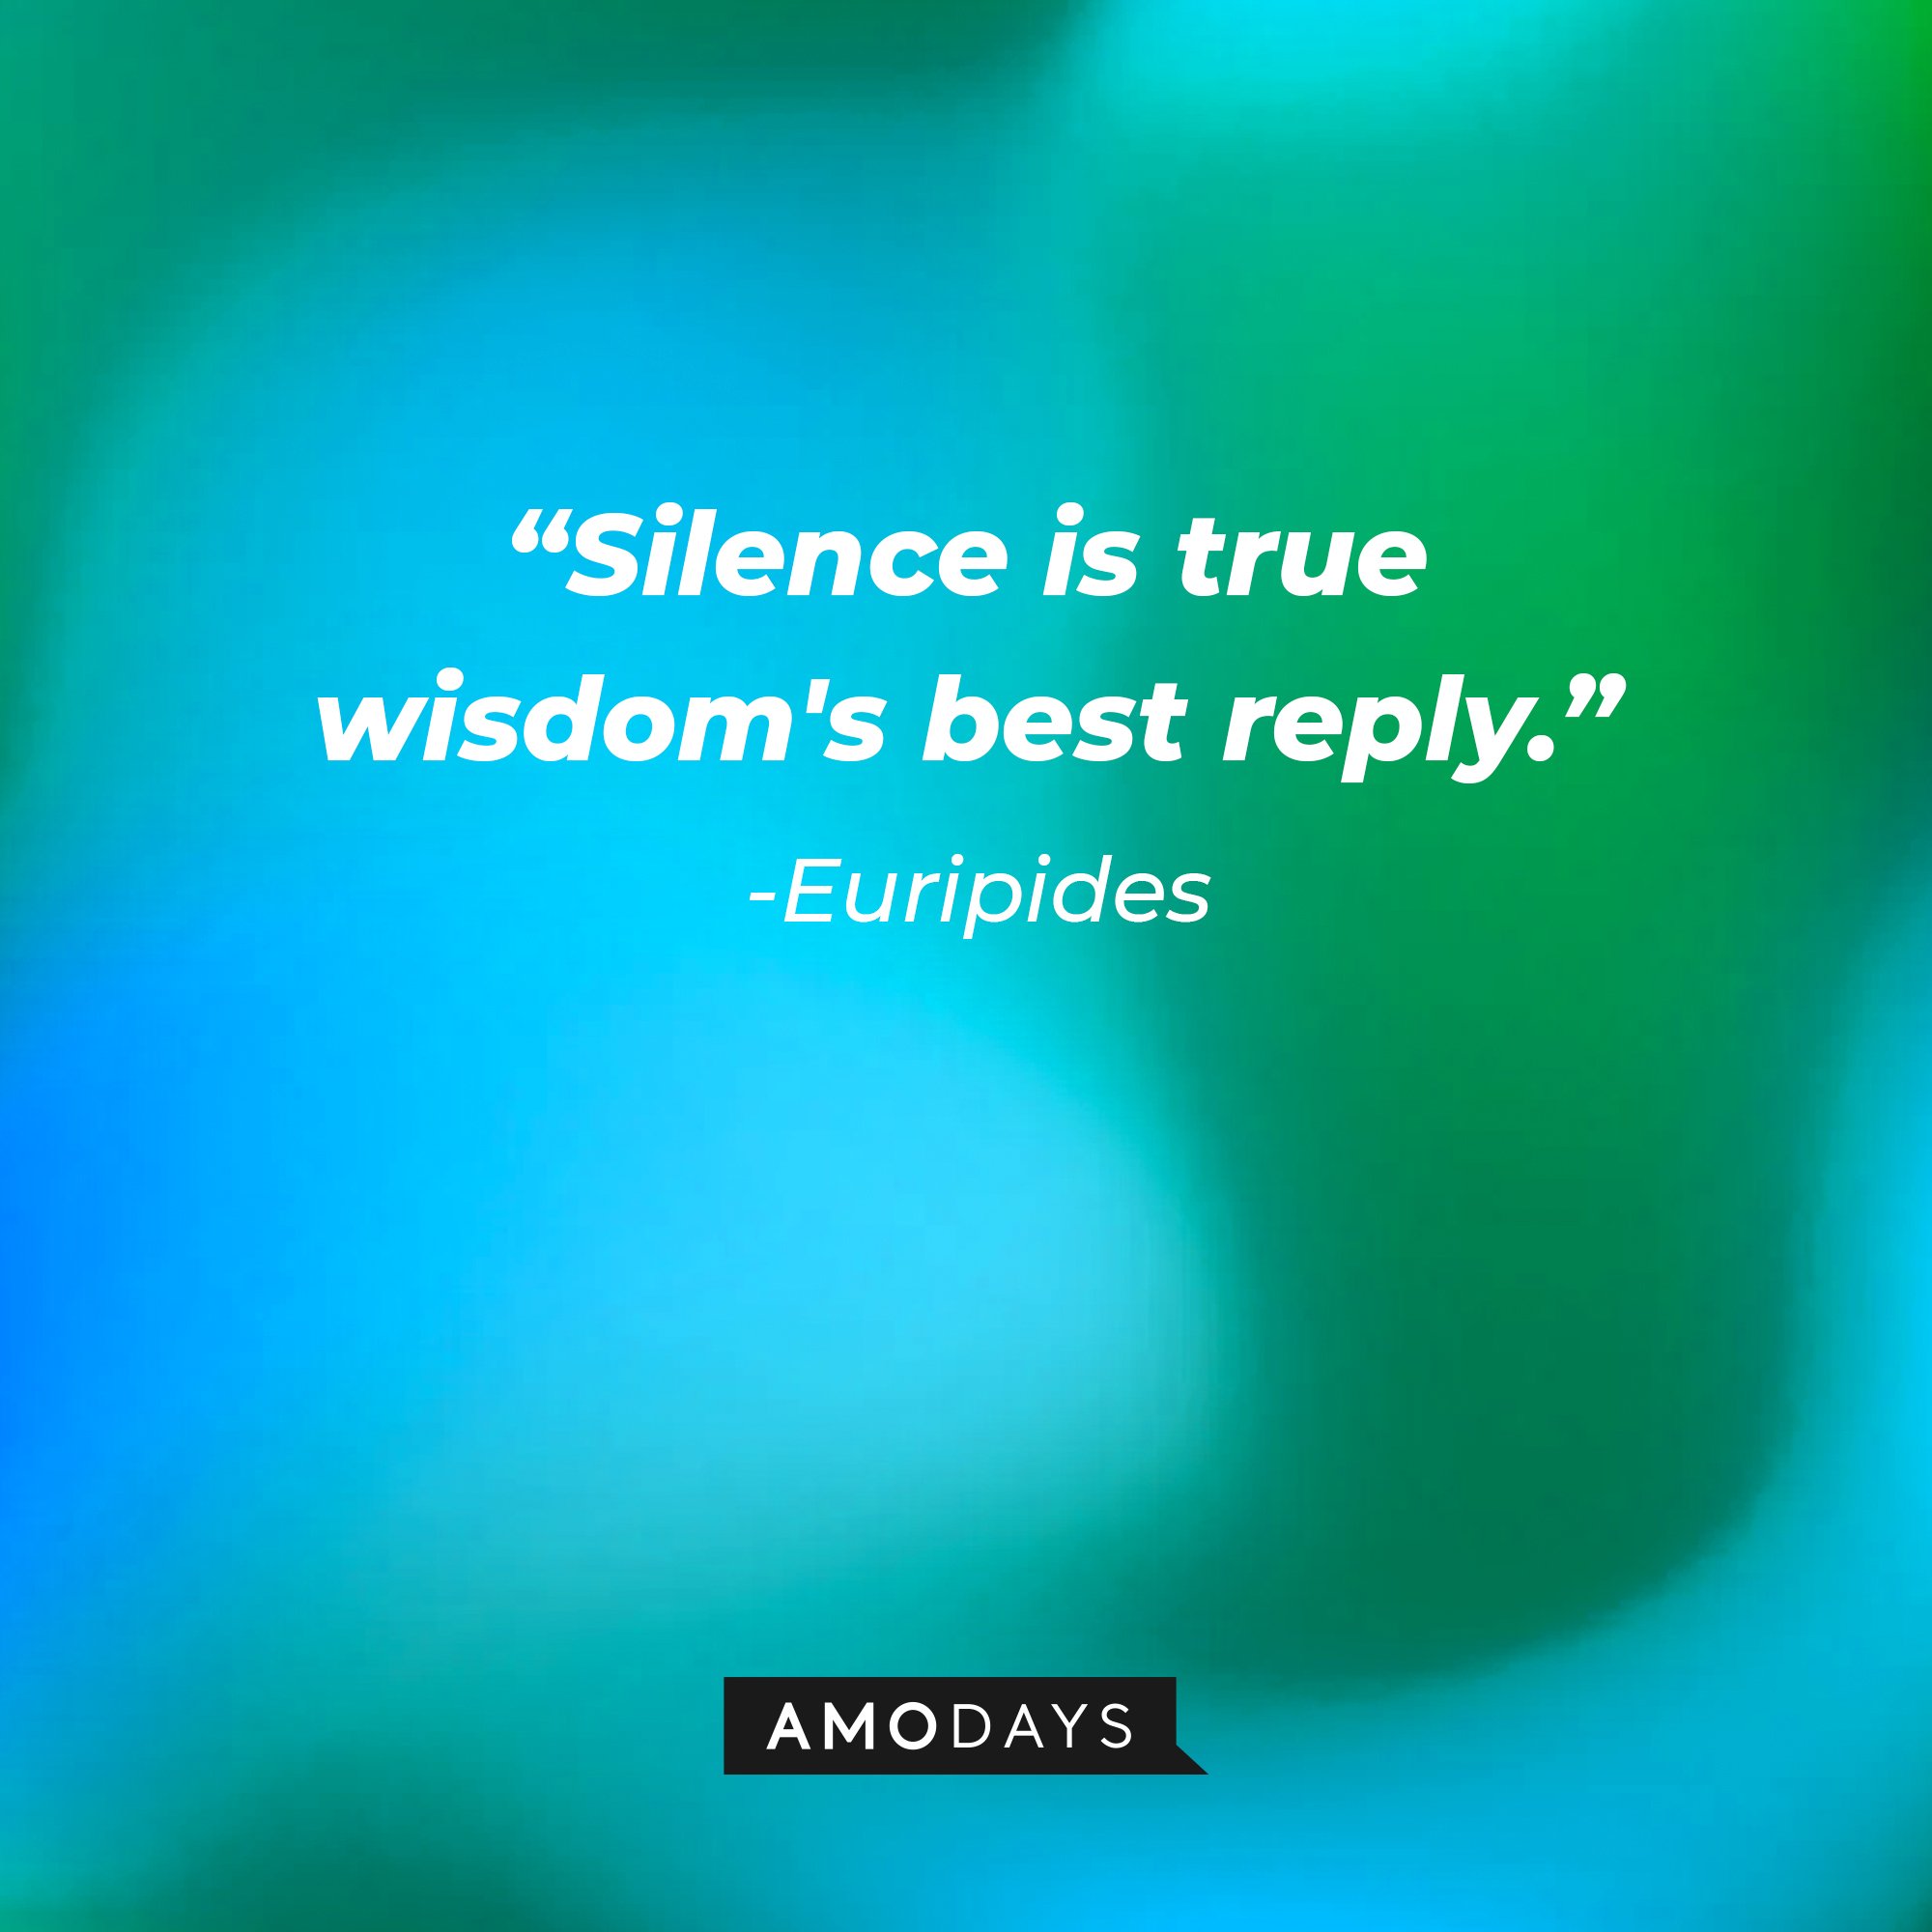 Euripides' quote:\\\\u00a0"Silence is true wisdom's best reply."\\\\u00a0| Image: AmoDays